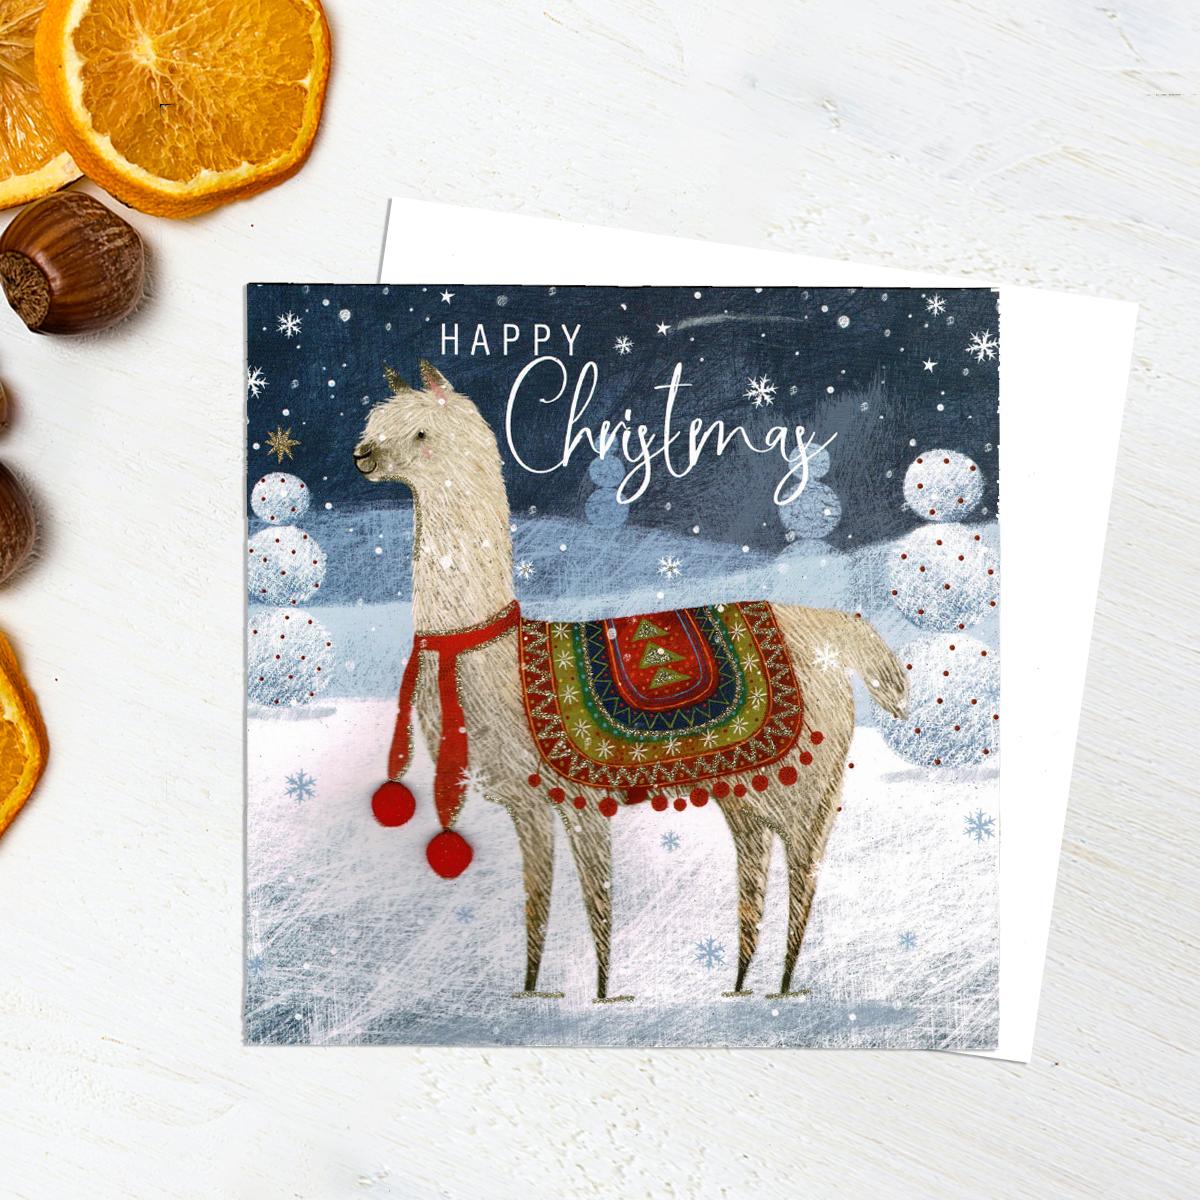 Happy Christmas Llama In The Snow General Christmas Card. With Added Sparkle And Pom Poms. Complete With White envelope